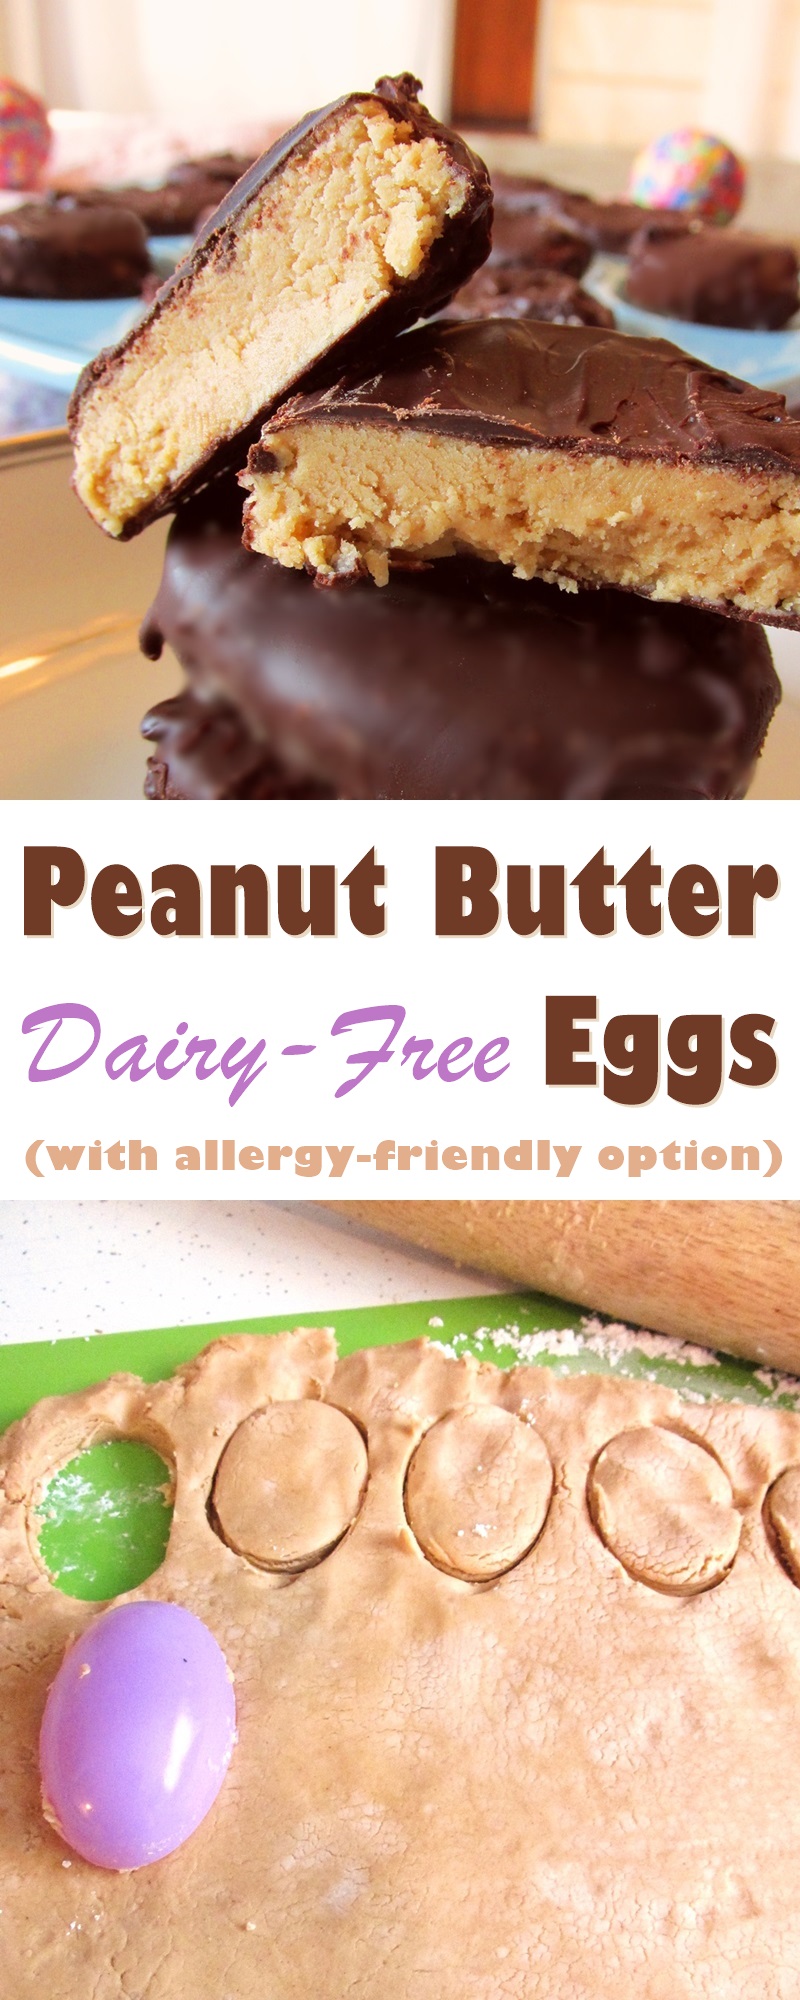 Dairy-Free Peanut Butter Eggs Recipe - great Easter treat or make into other shapes! Vegan, gluten-free, optionally nut-free